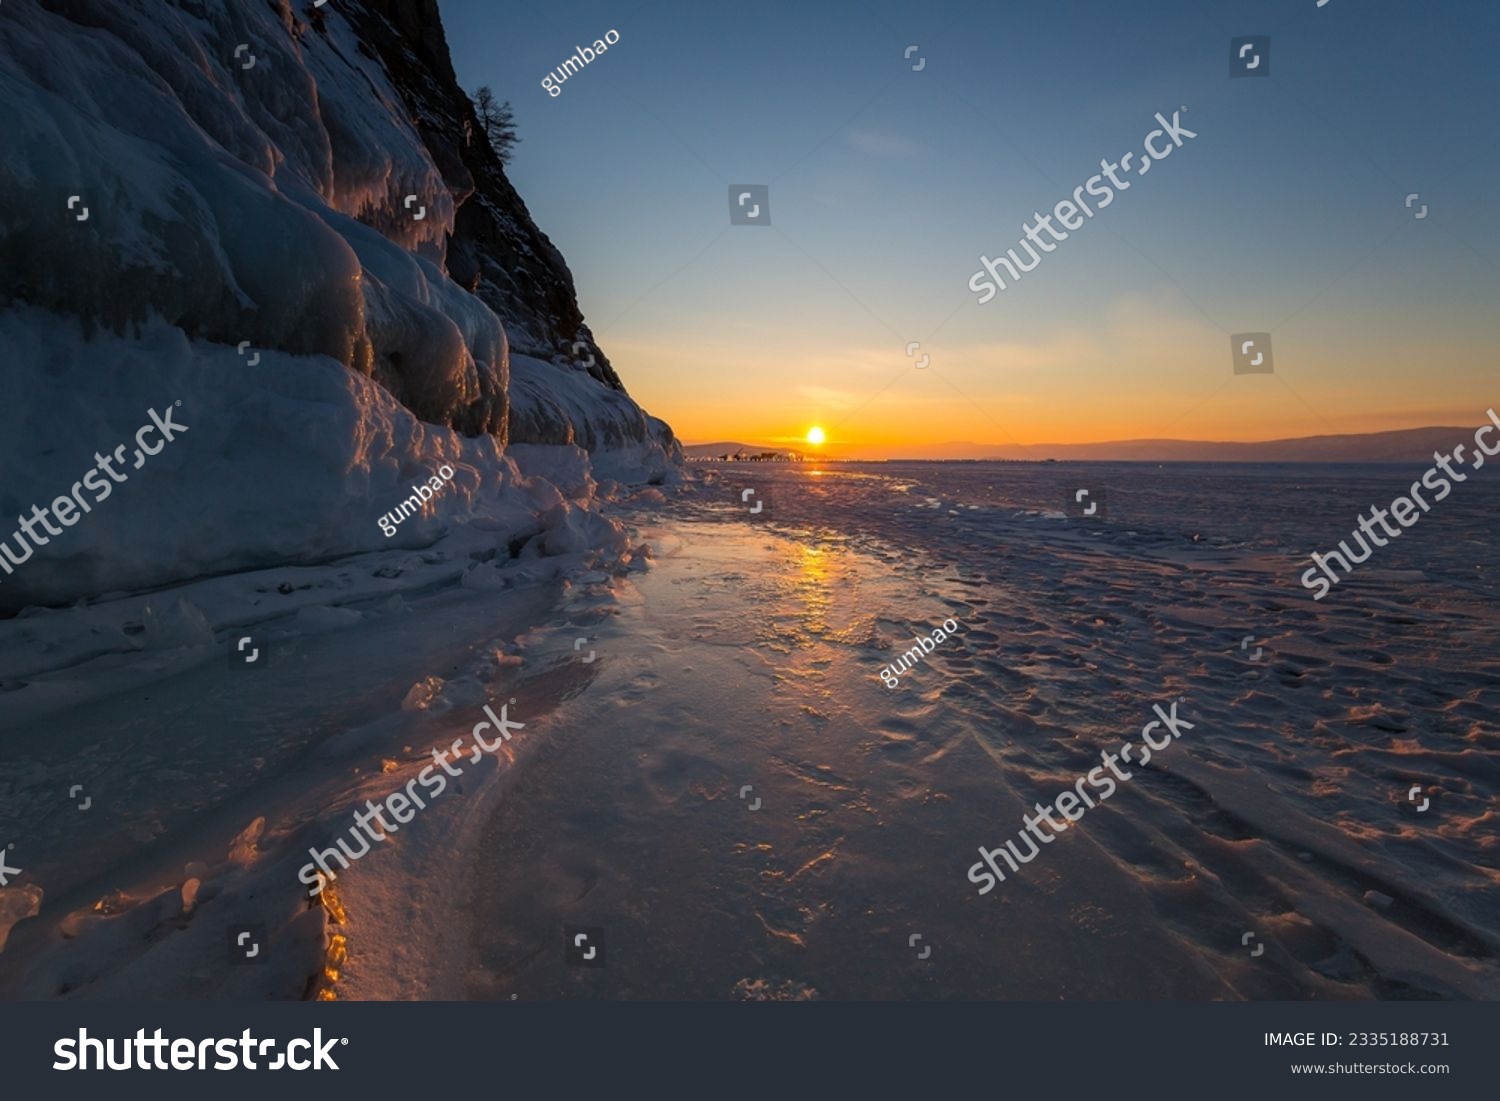 Coast of lake Baikal in winter, the deepest and largest freshwater lake by volume in the world, located in southern Siberia, Russia #2335188731